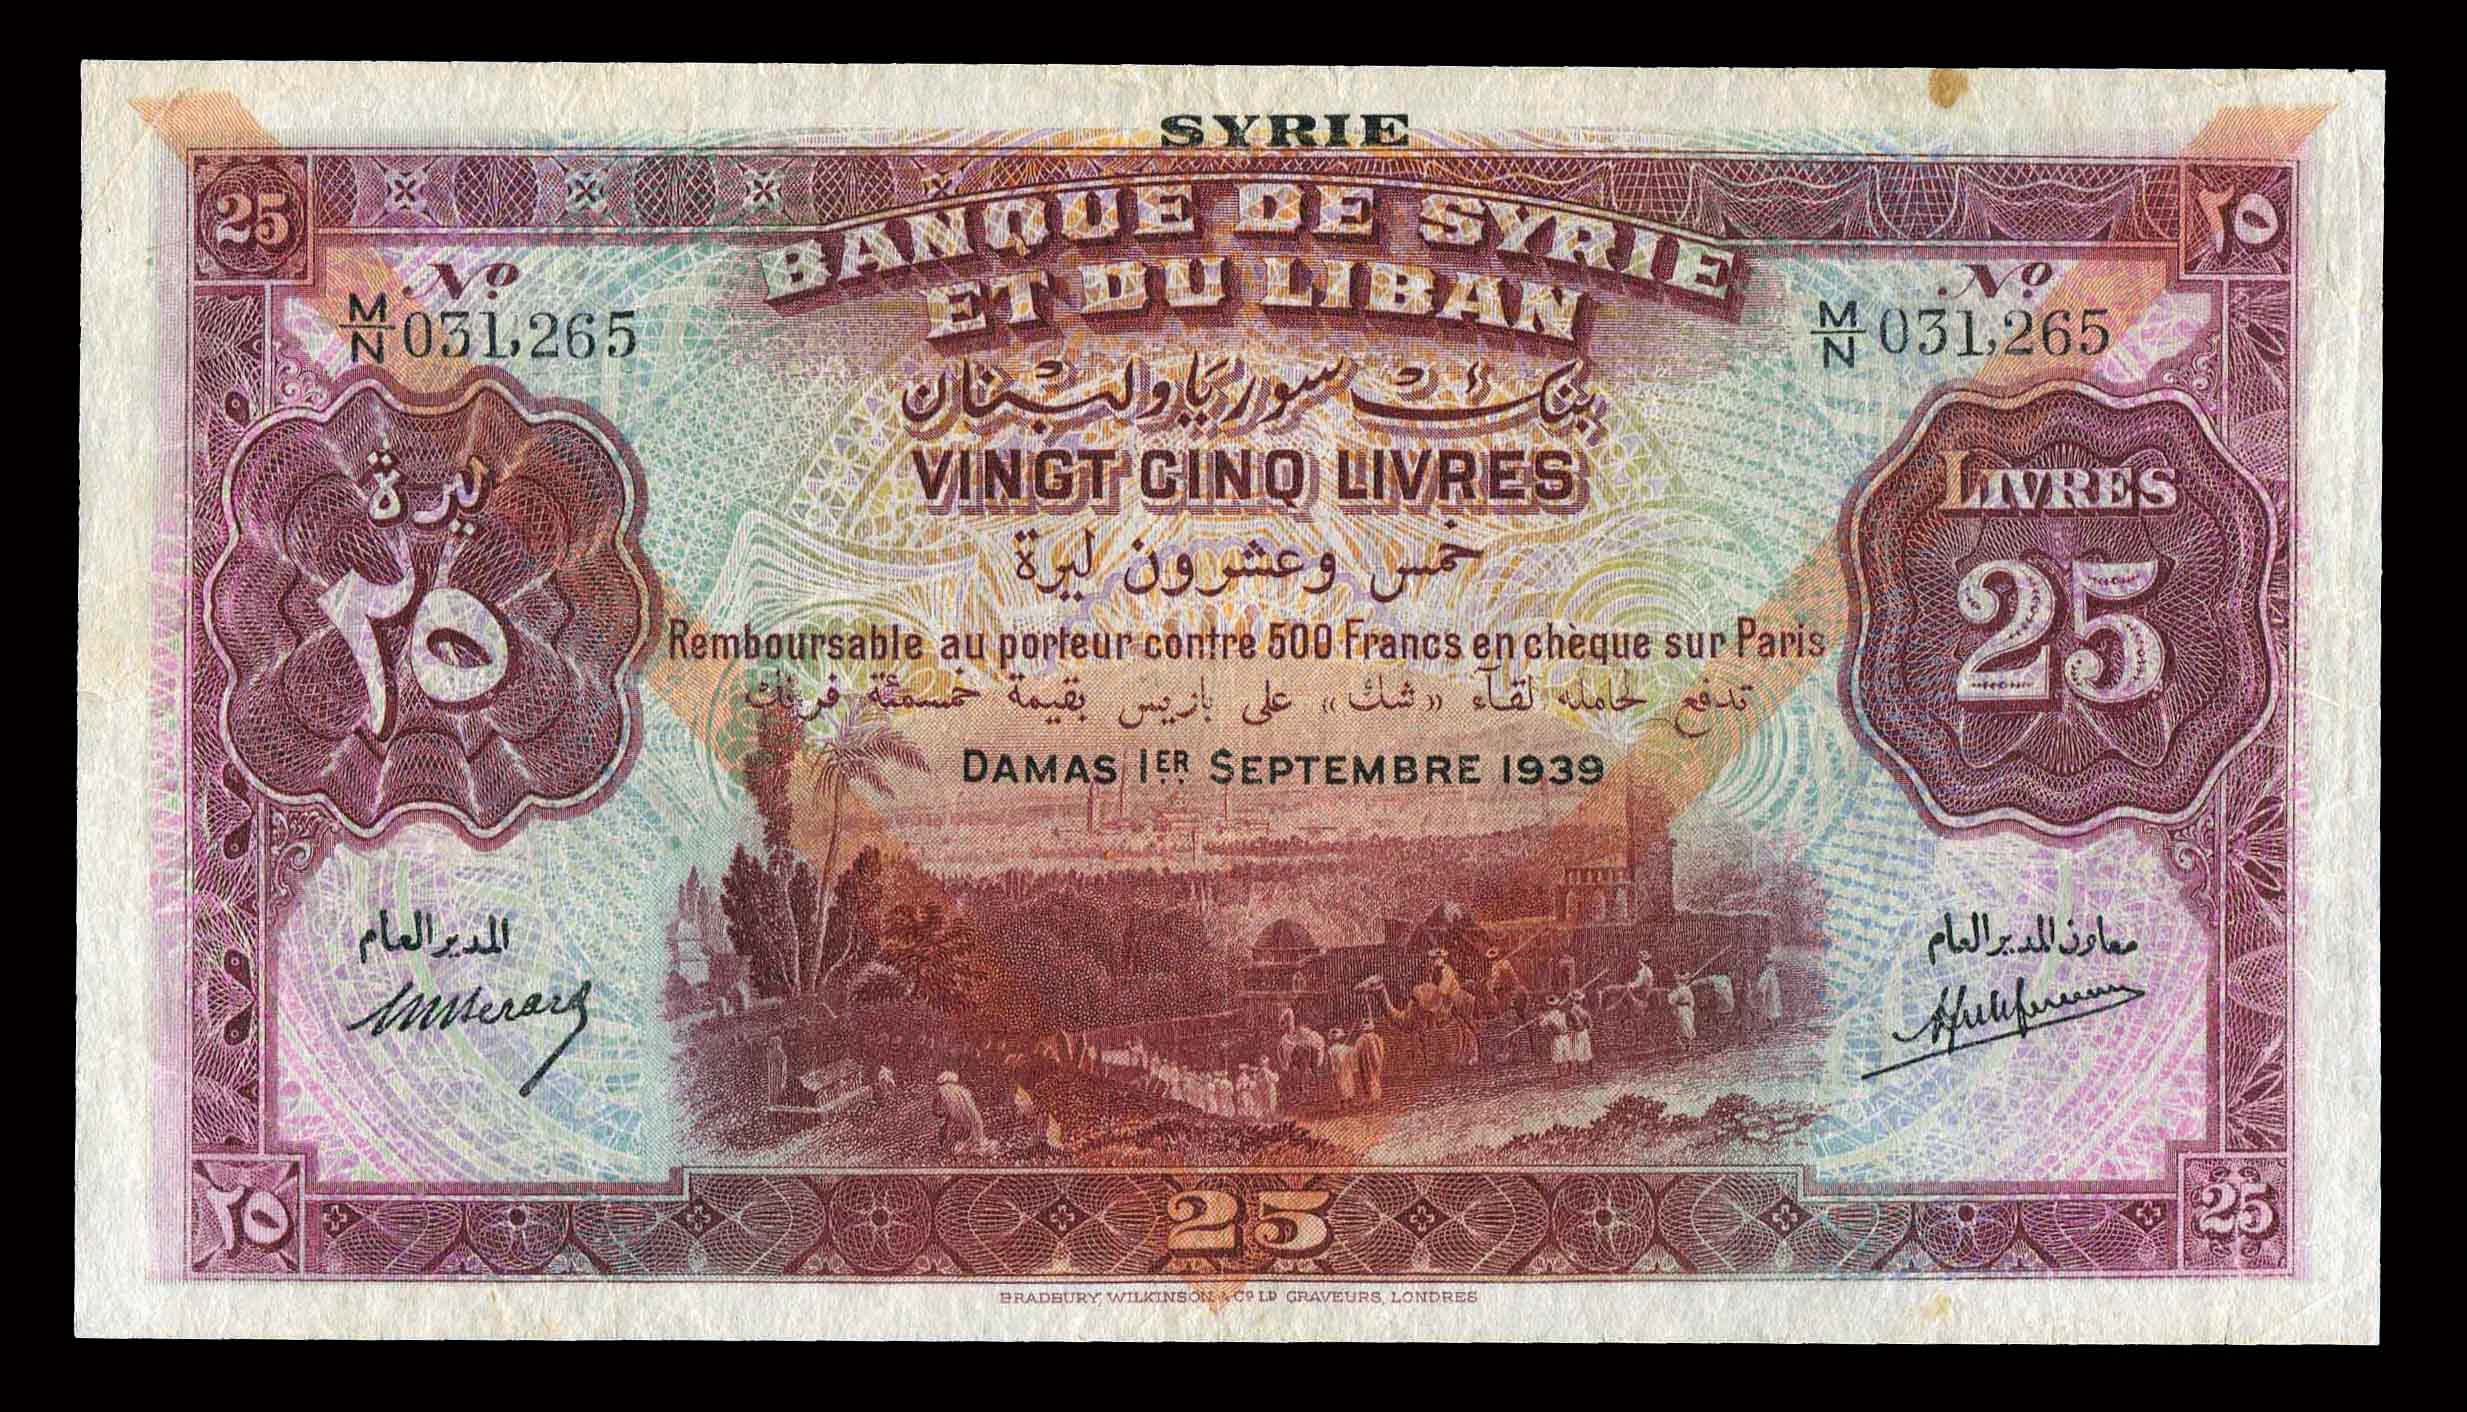 Syria, Banque de Syrie et du Liban, 1 September 1939 Issue, 25 livres, with type C overprint in